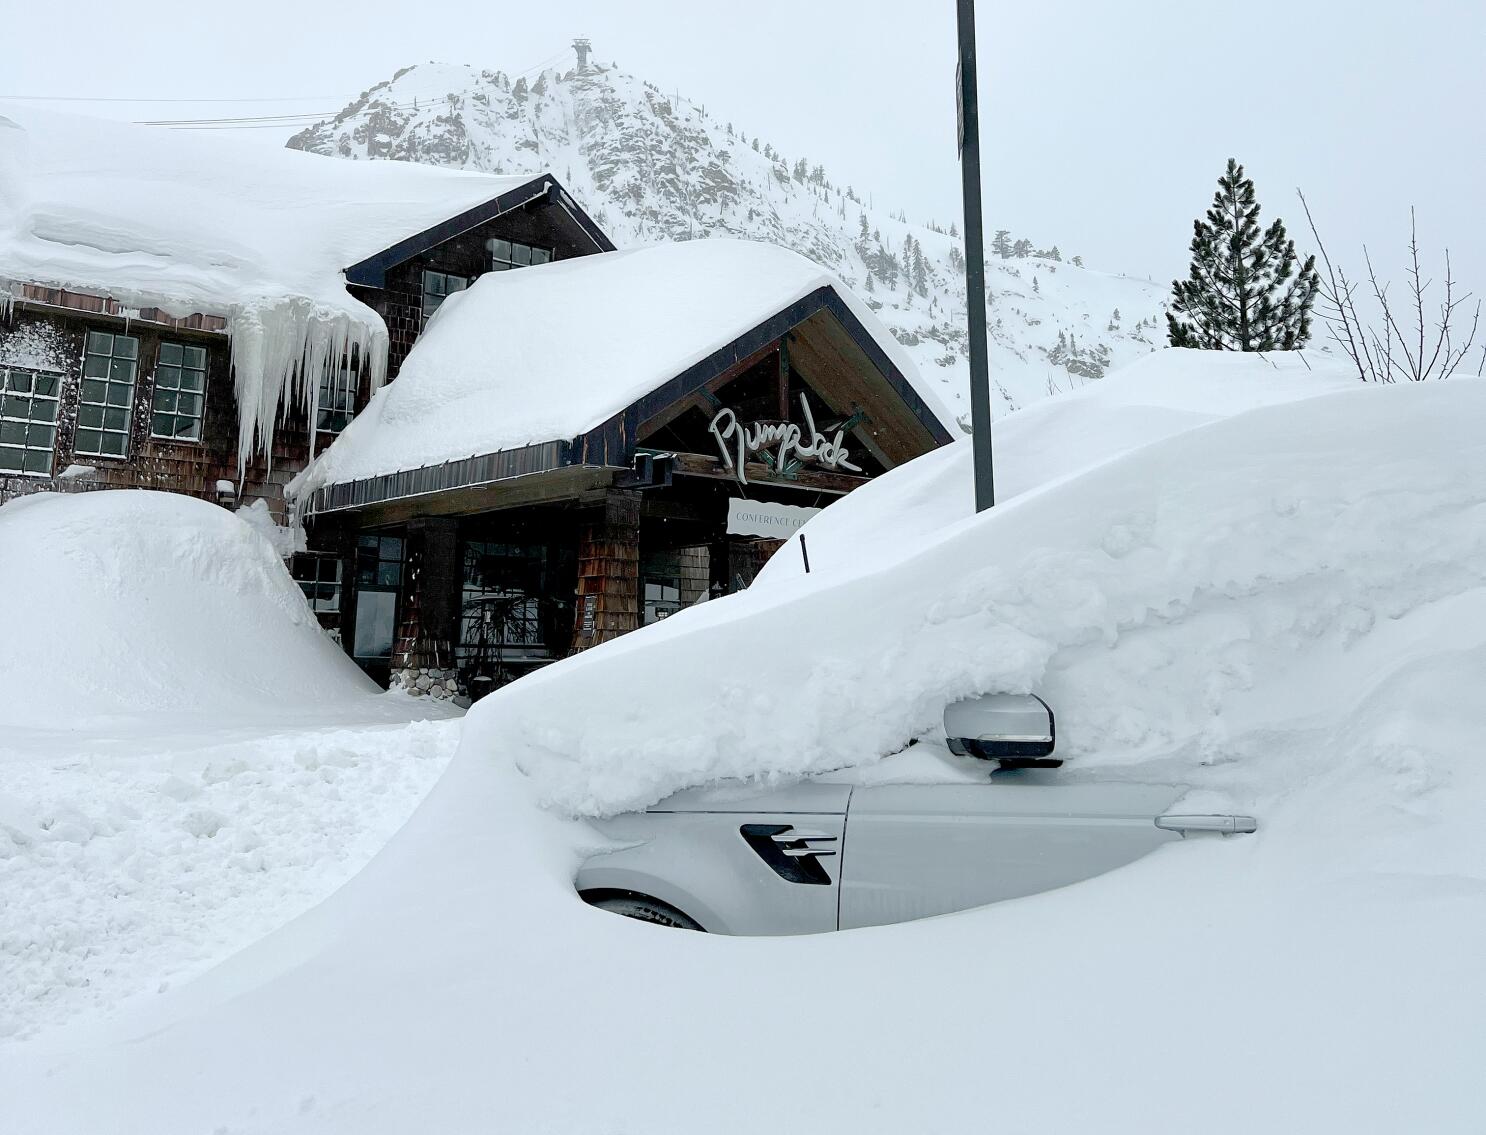 Multiple avalanches in less than 1 week at Lake Tahoe serve as